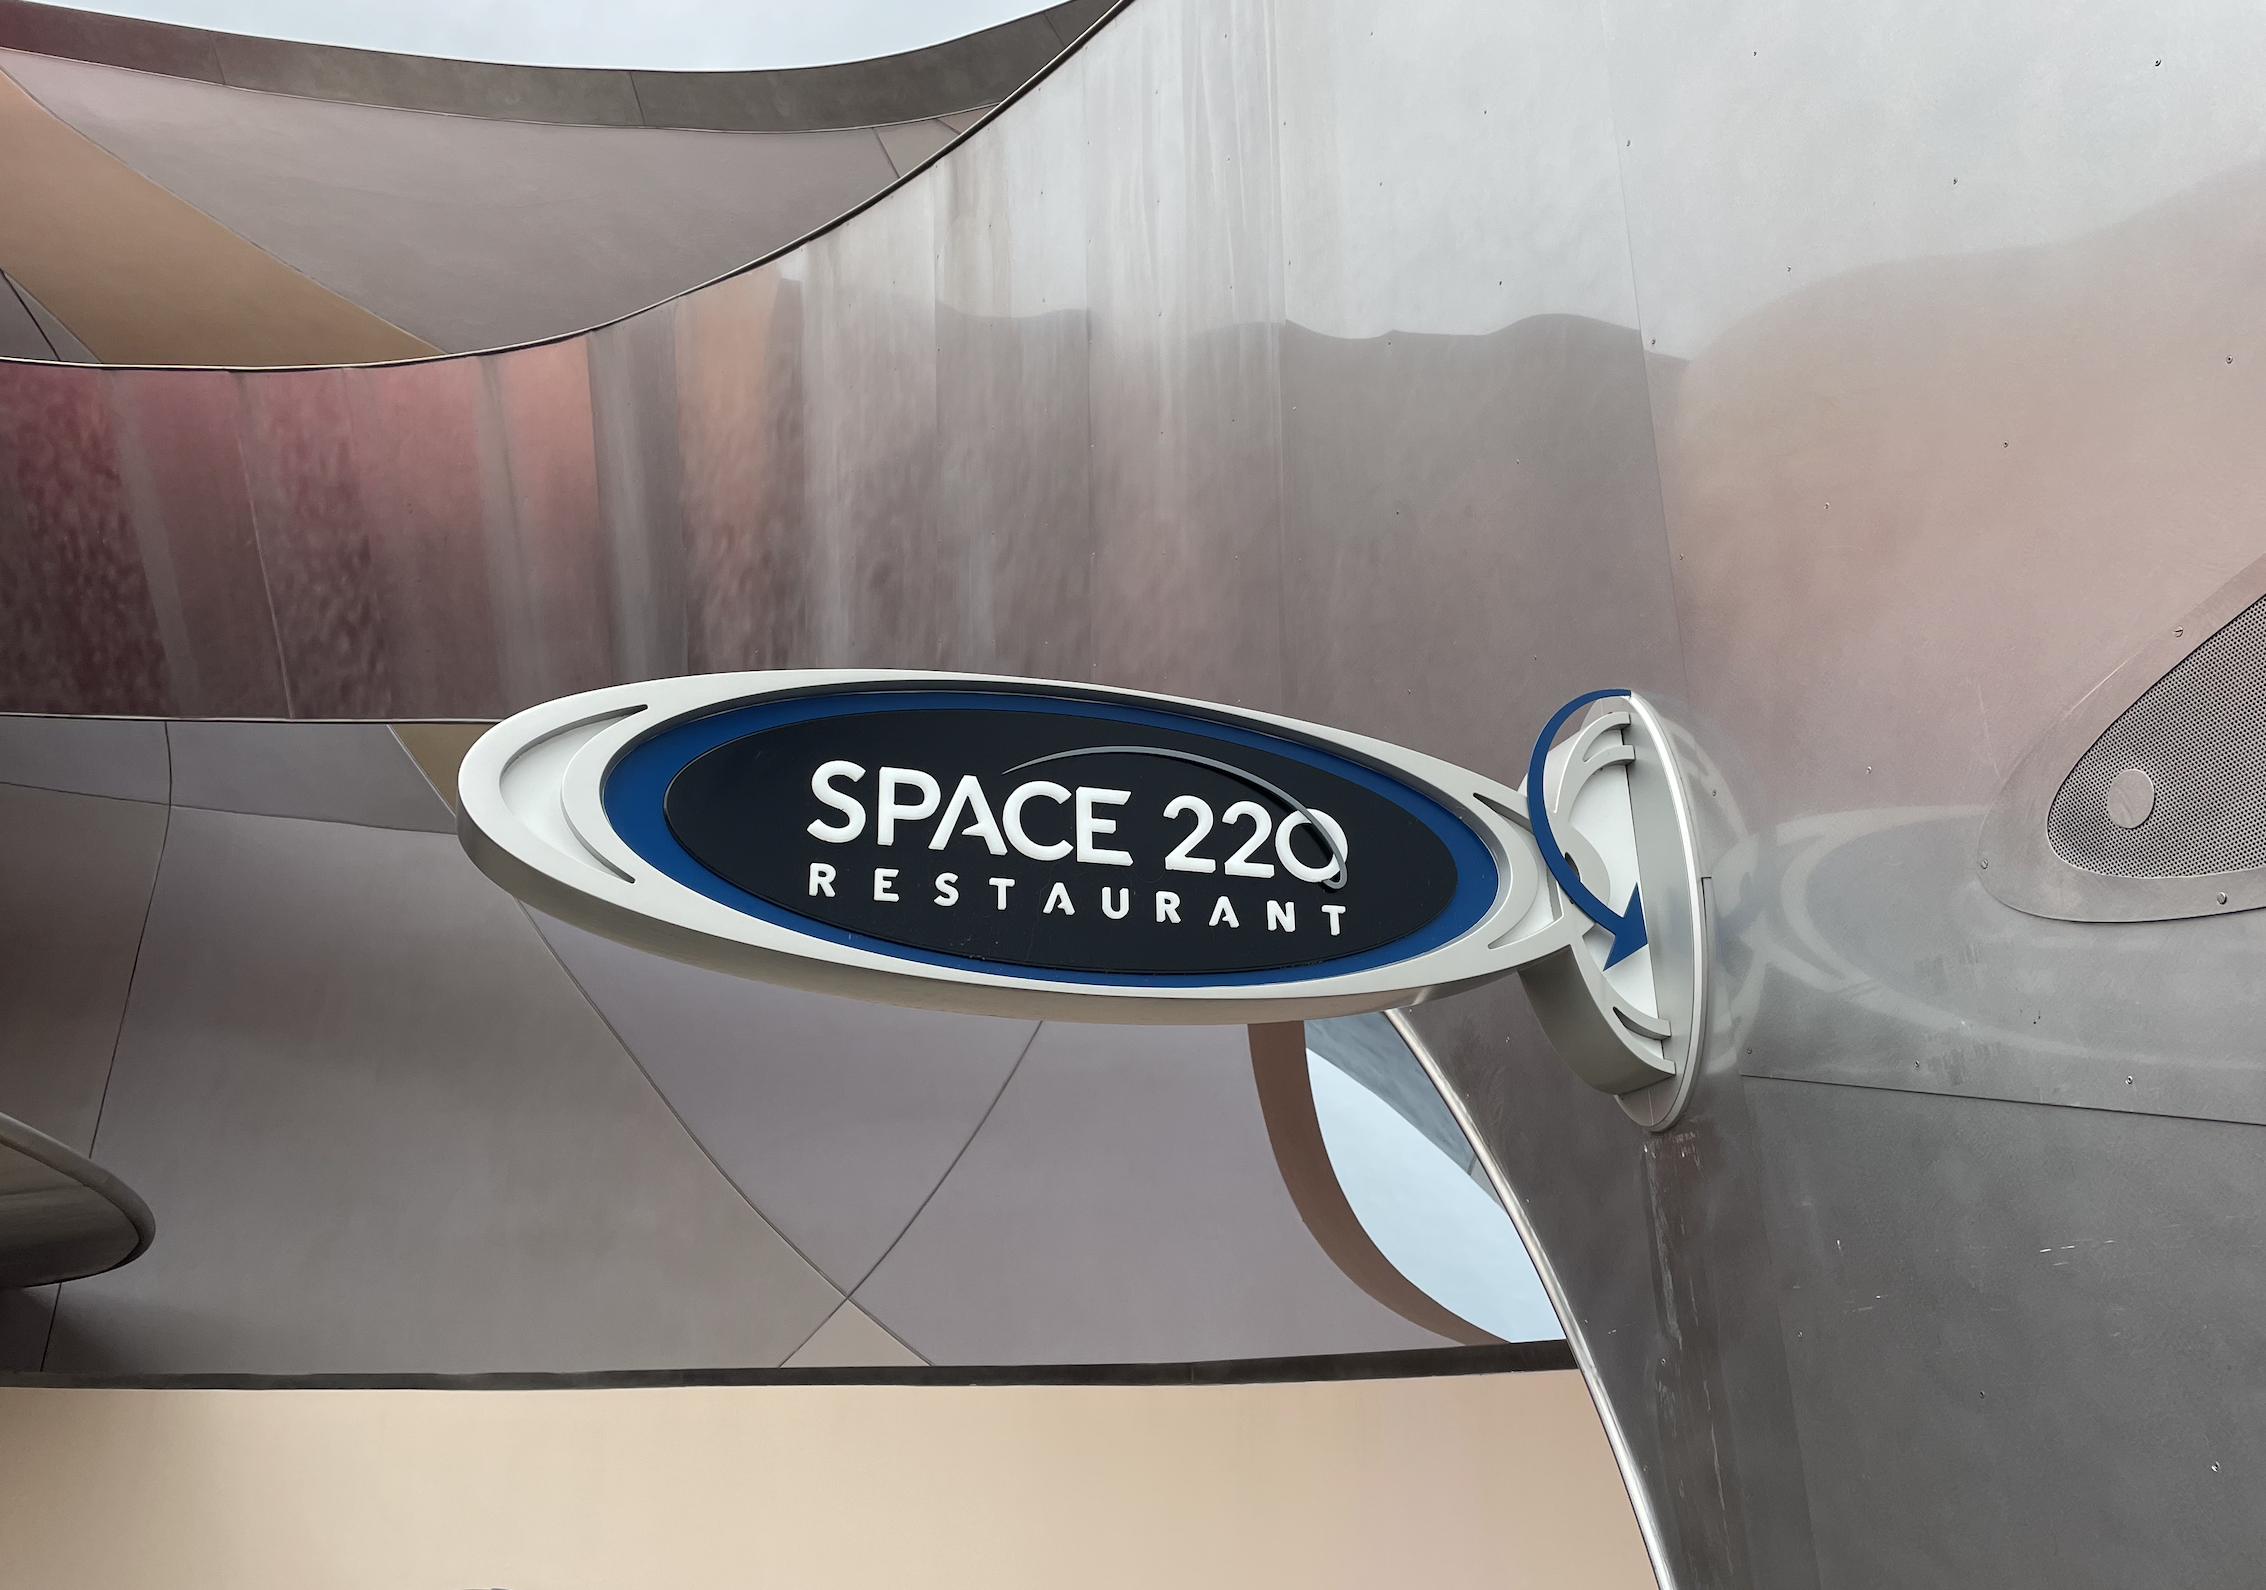 Lost in Space 220: A Restaurant Dining Review